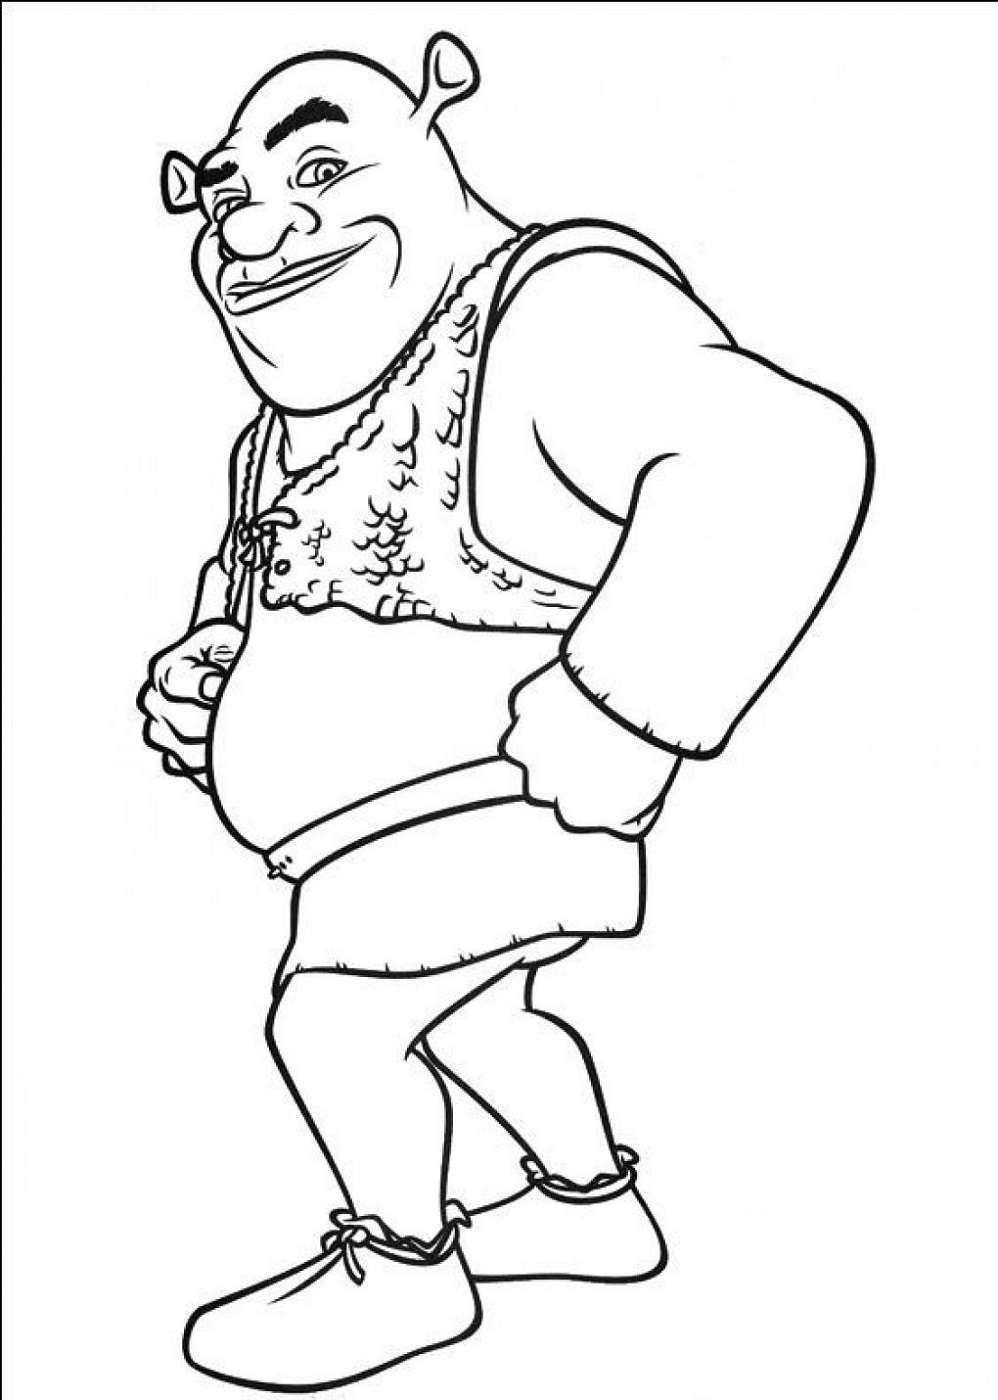 Childrens Colouring Pages to Print Shrek